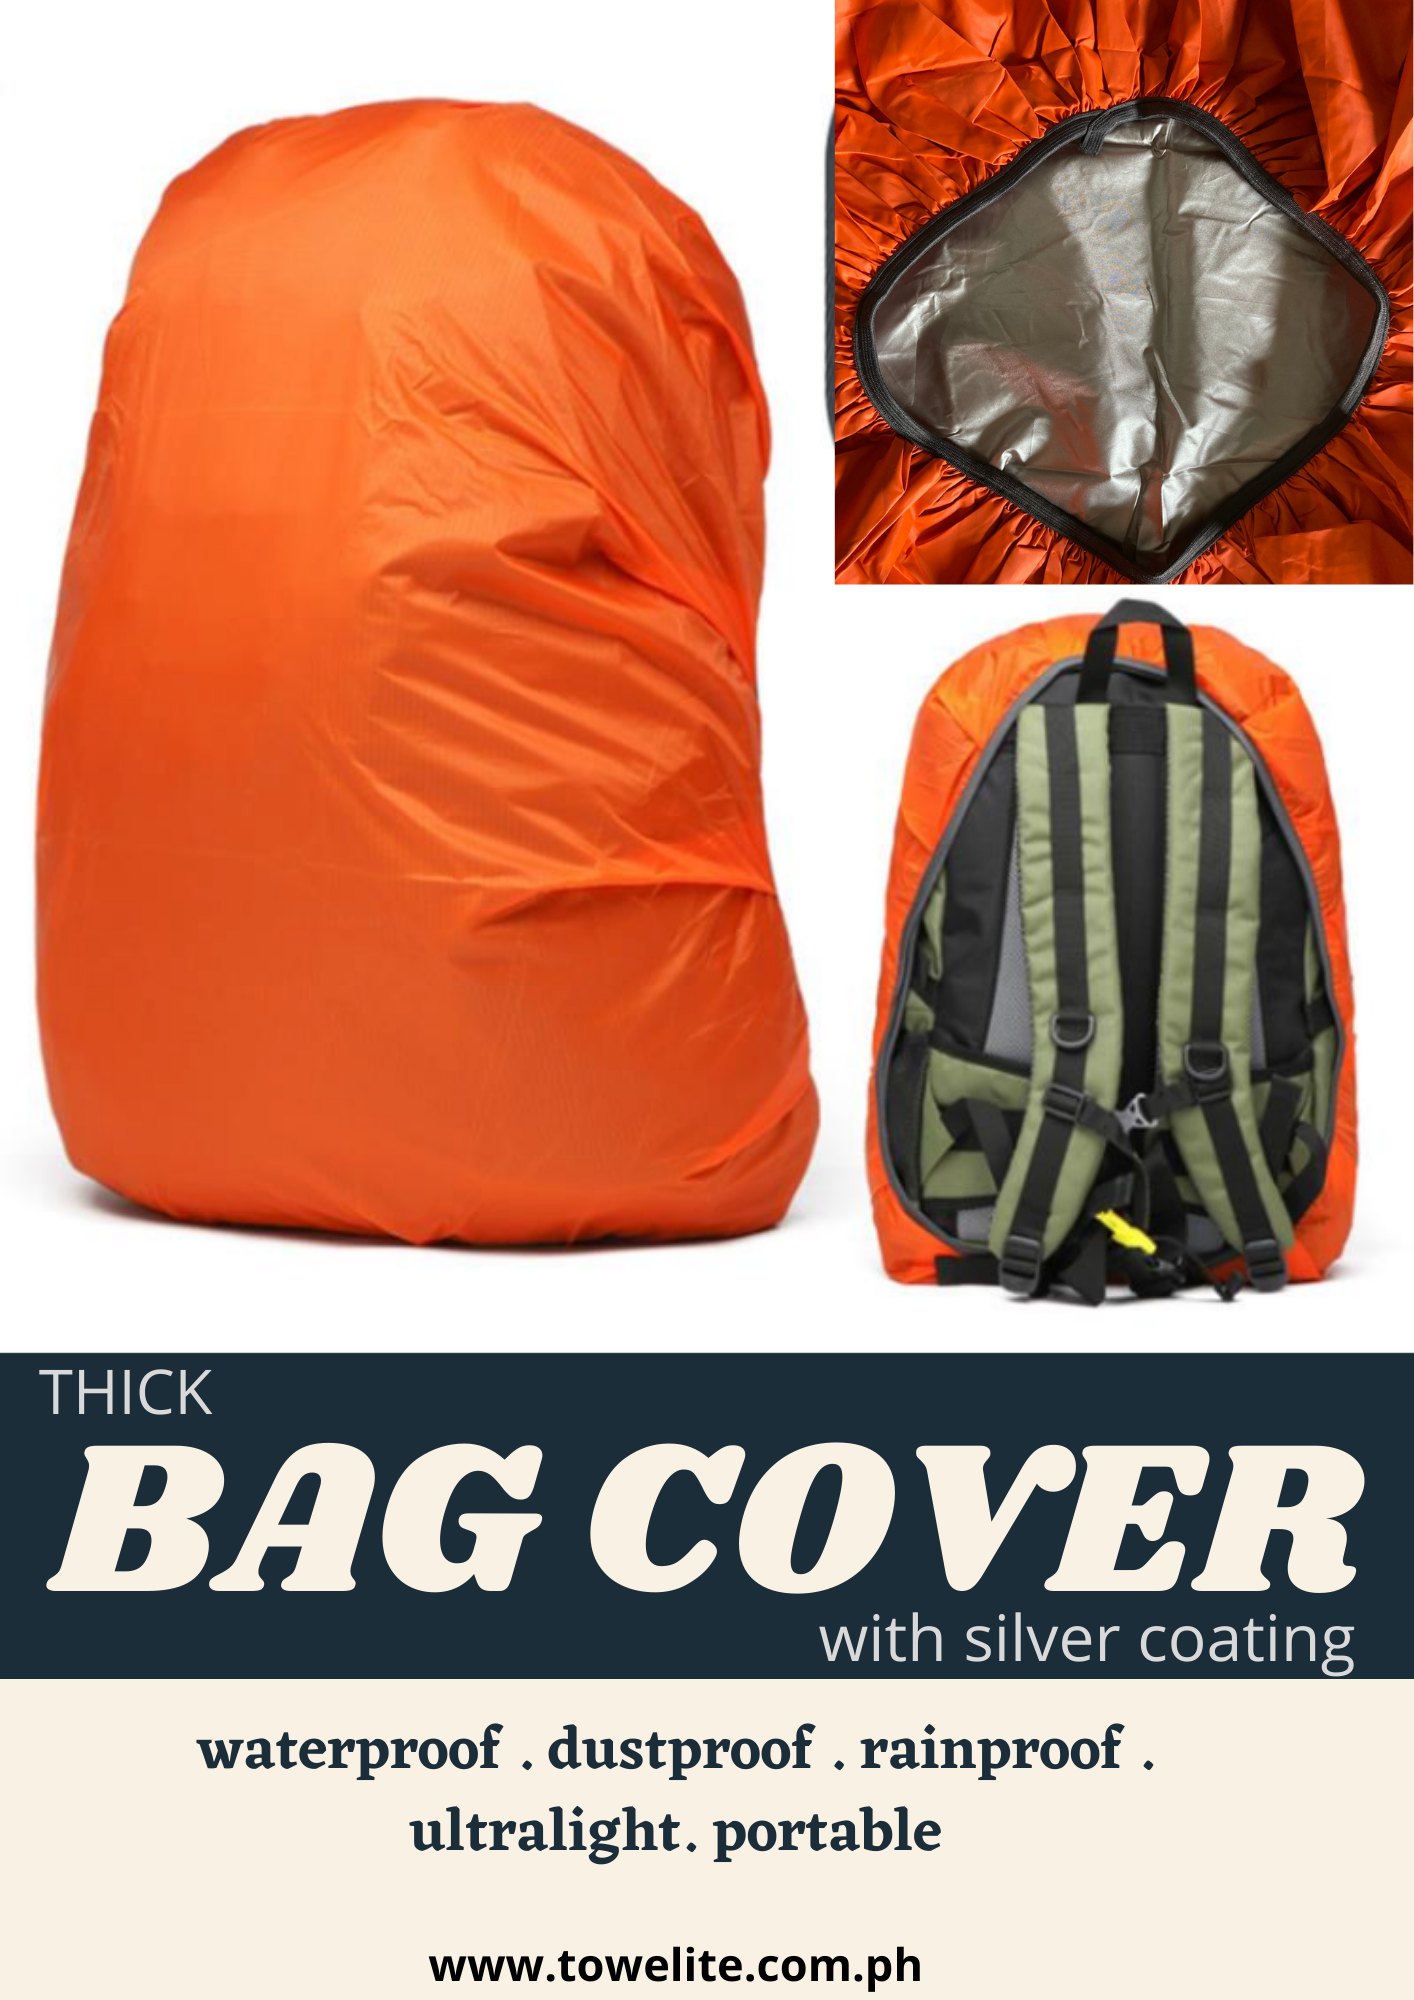 https://www.towelite.com.ph/wp-content/uploads/2021/08/bag-cover-with-coating-1.png